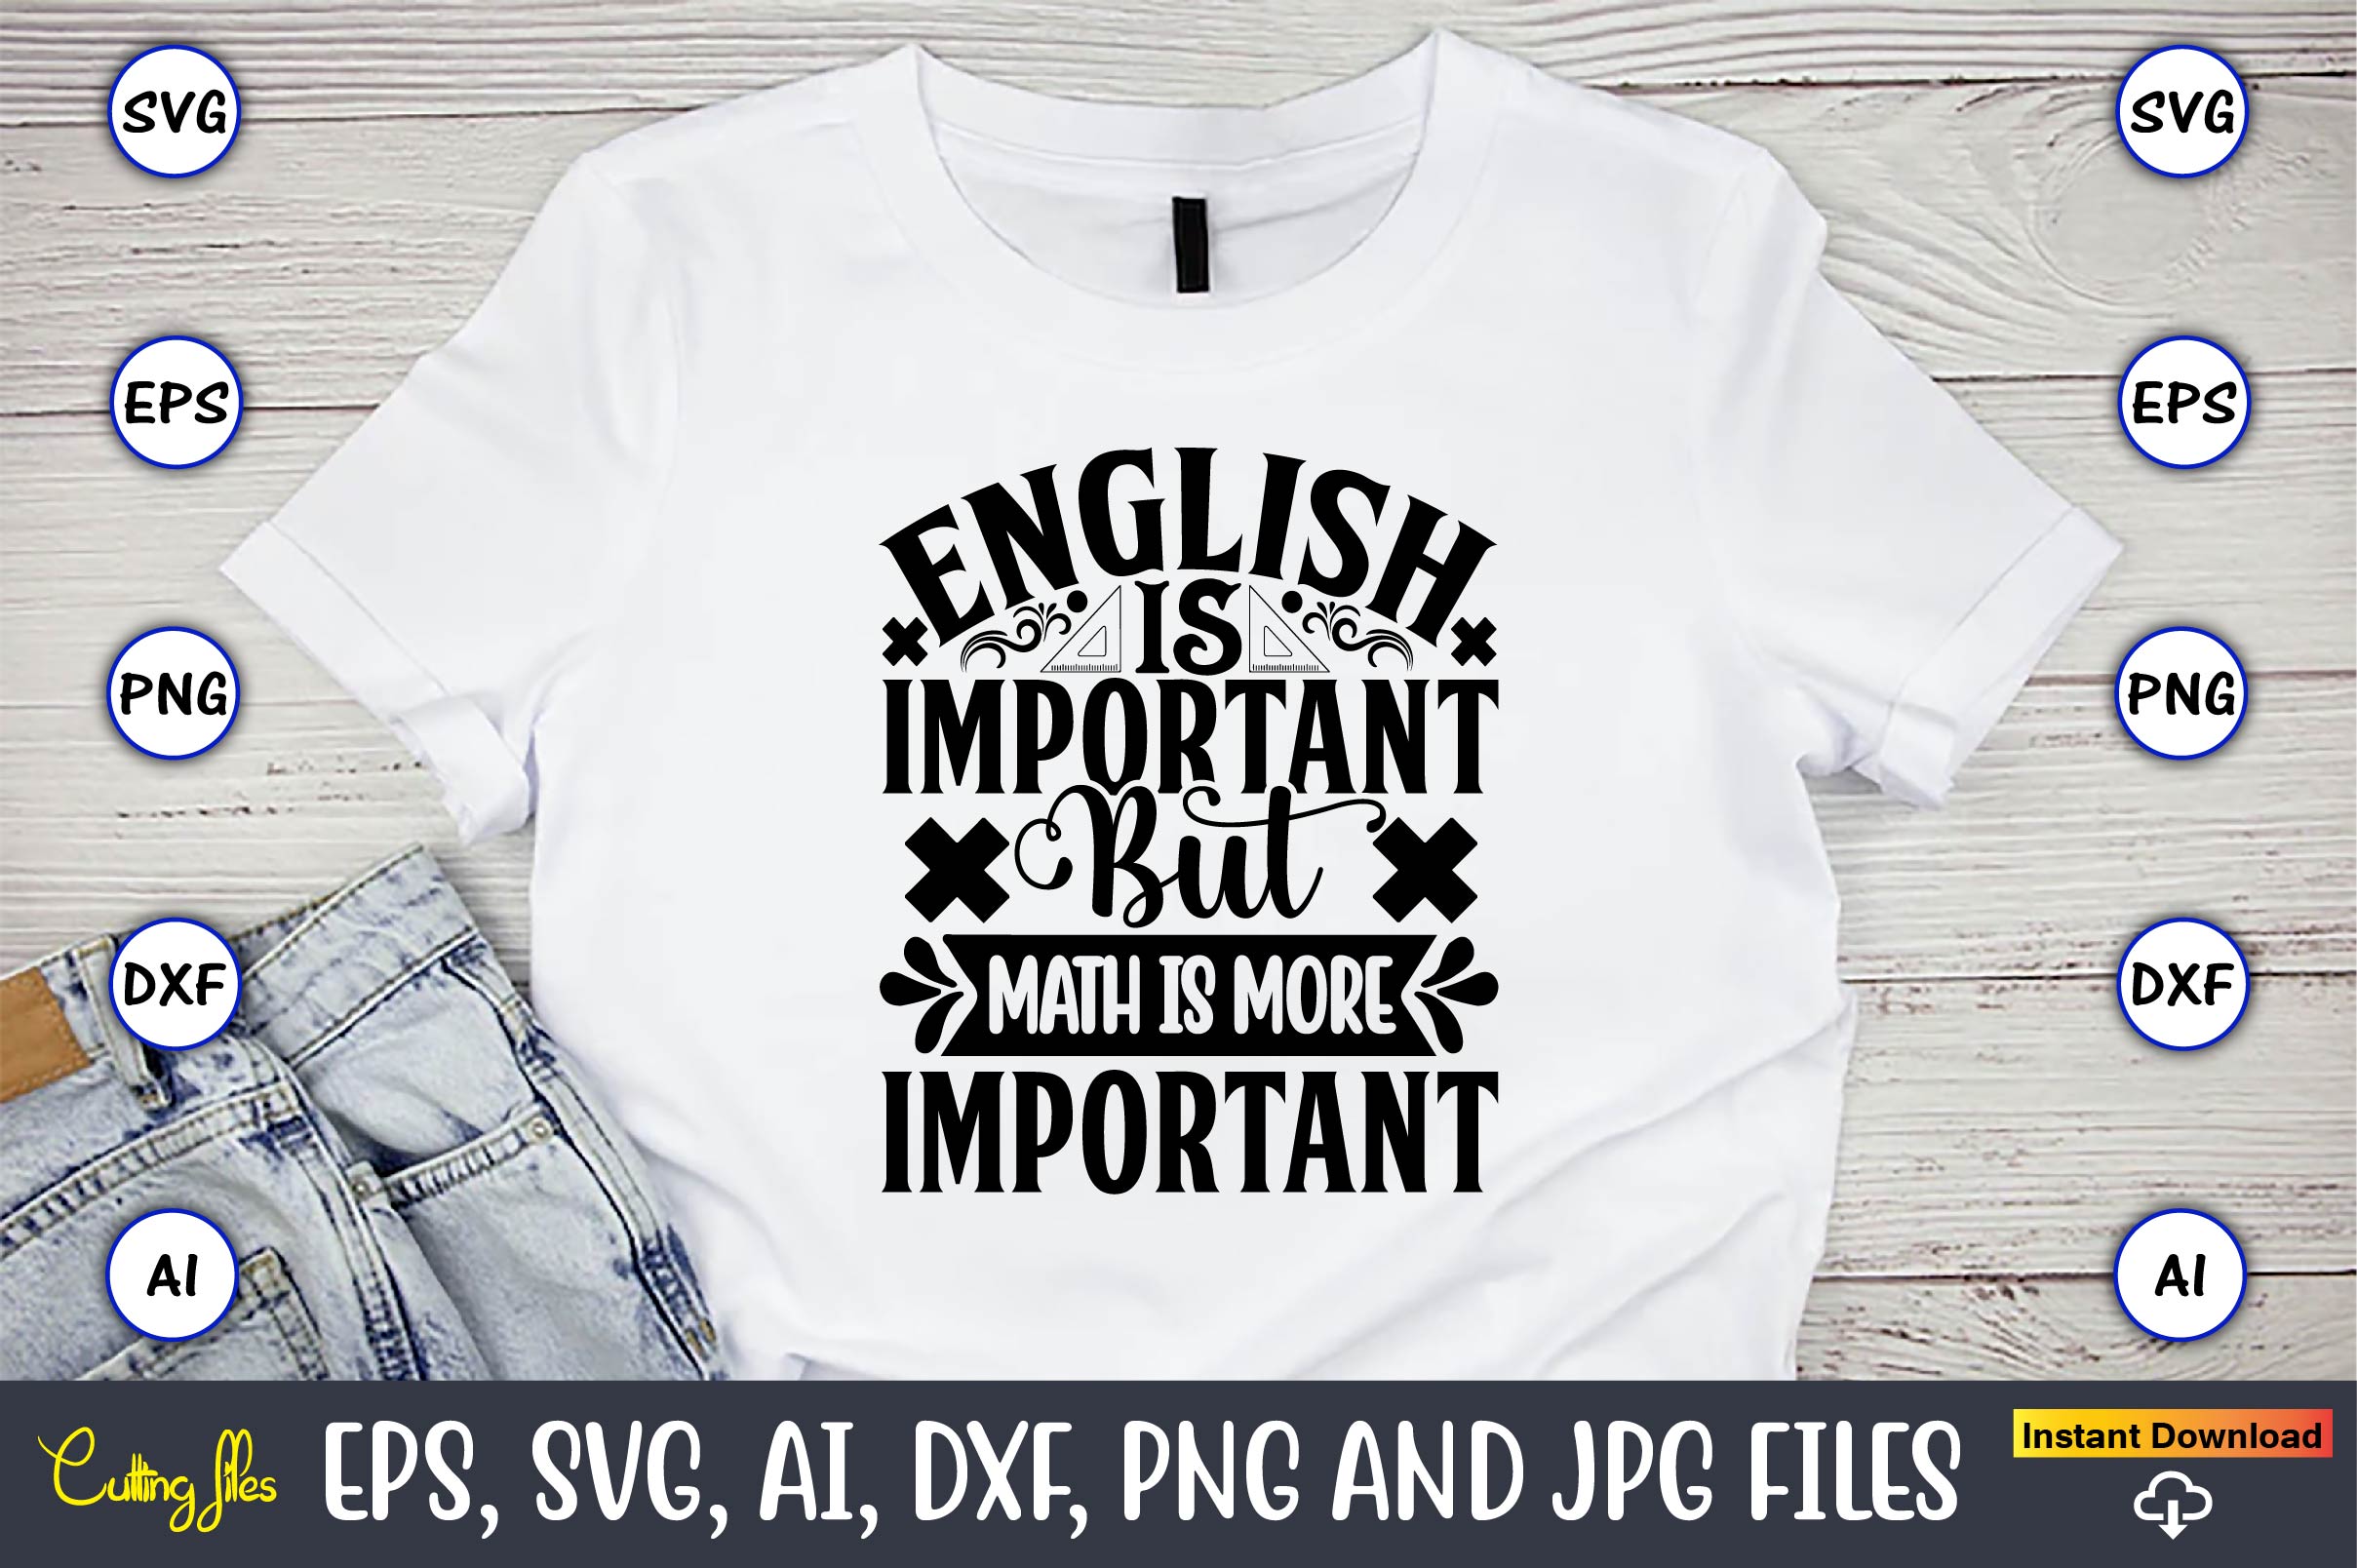 Image of a white T-shirt with a beautiful inscription English is important but math is more important.